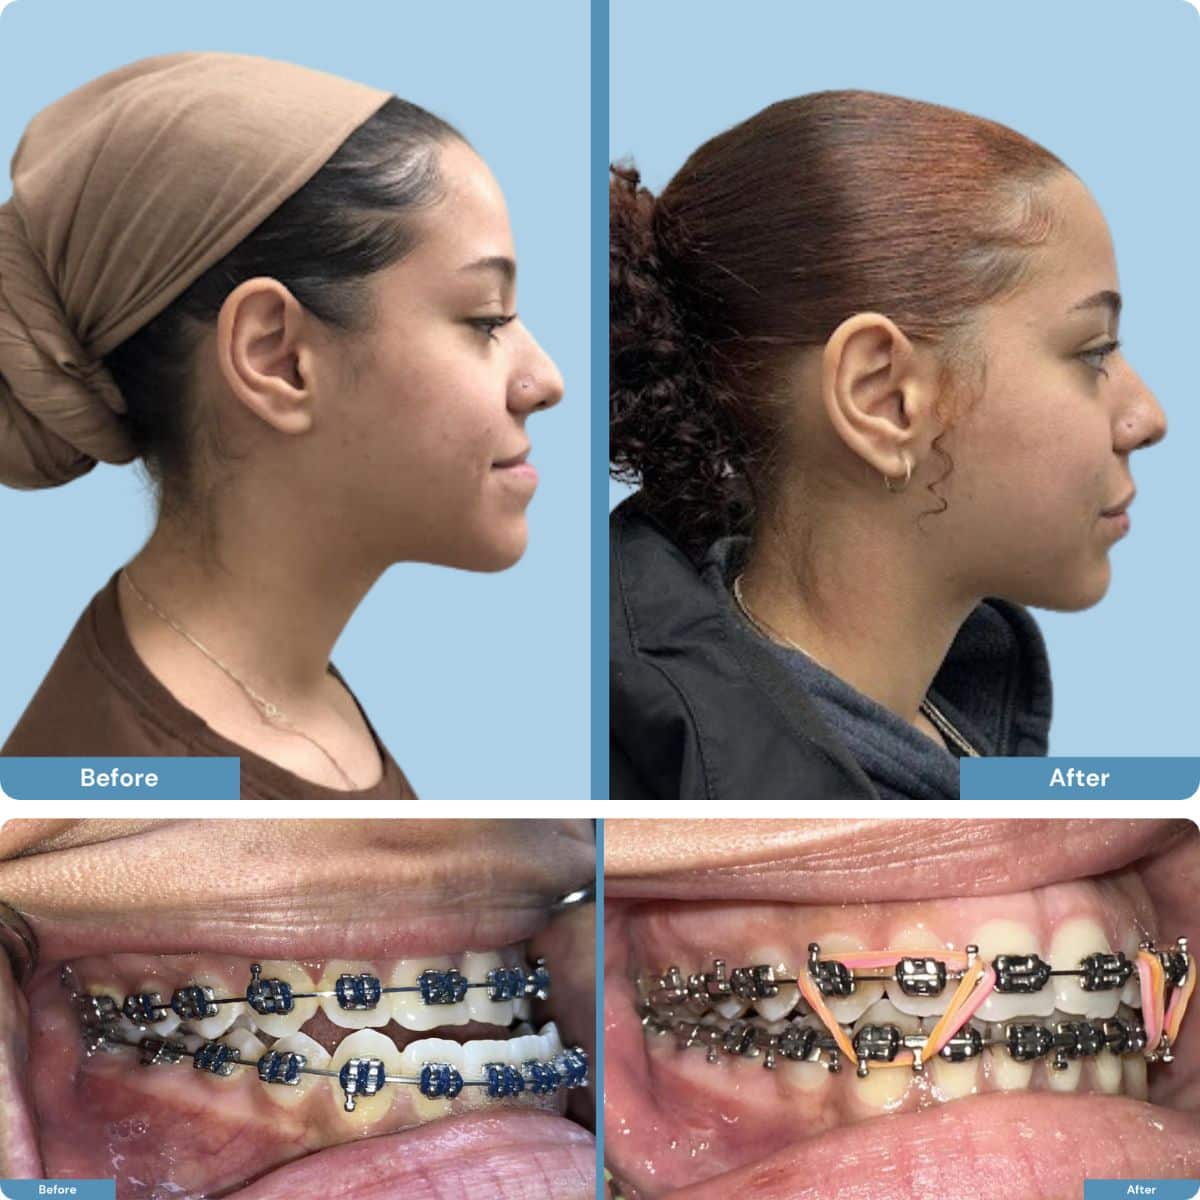 Before and after orthognathic jaw surgery on young girl